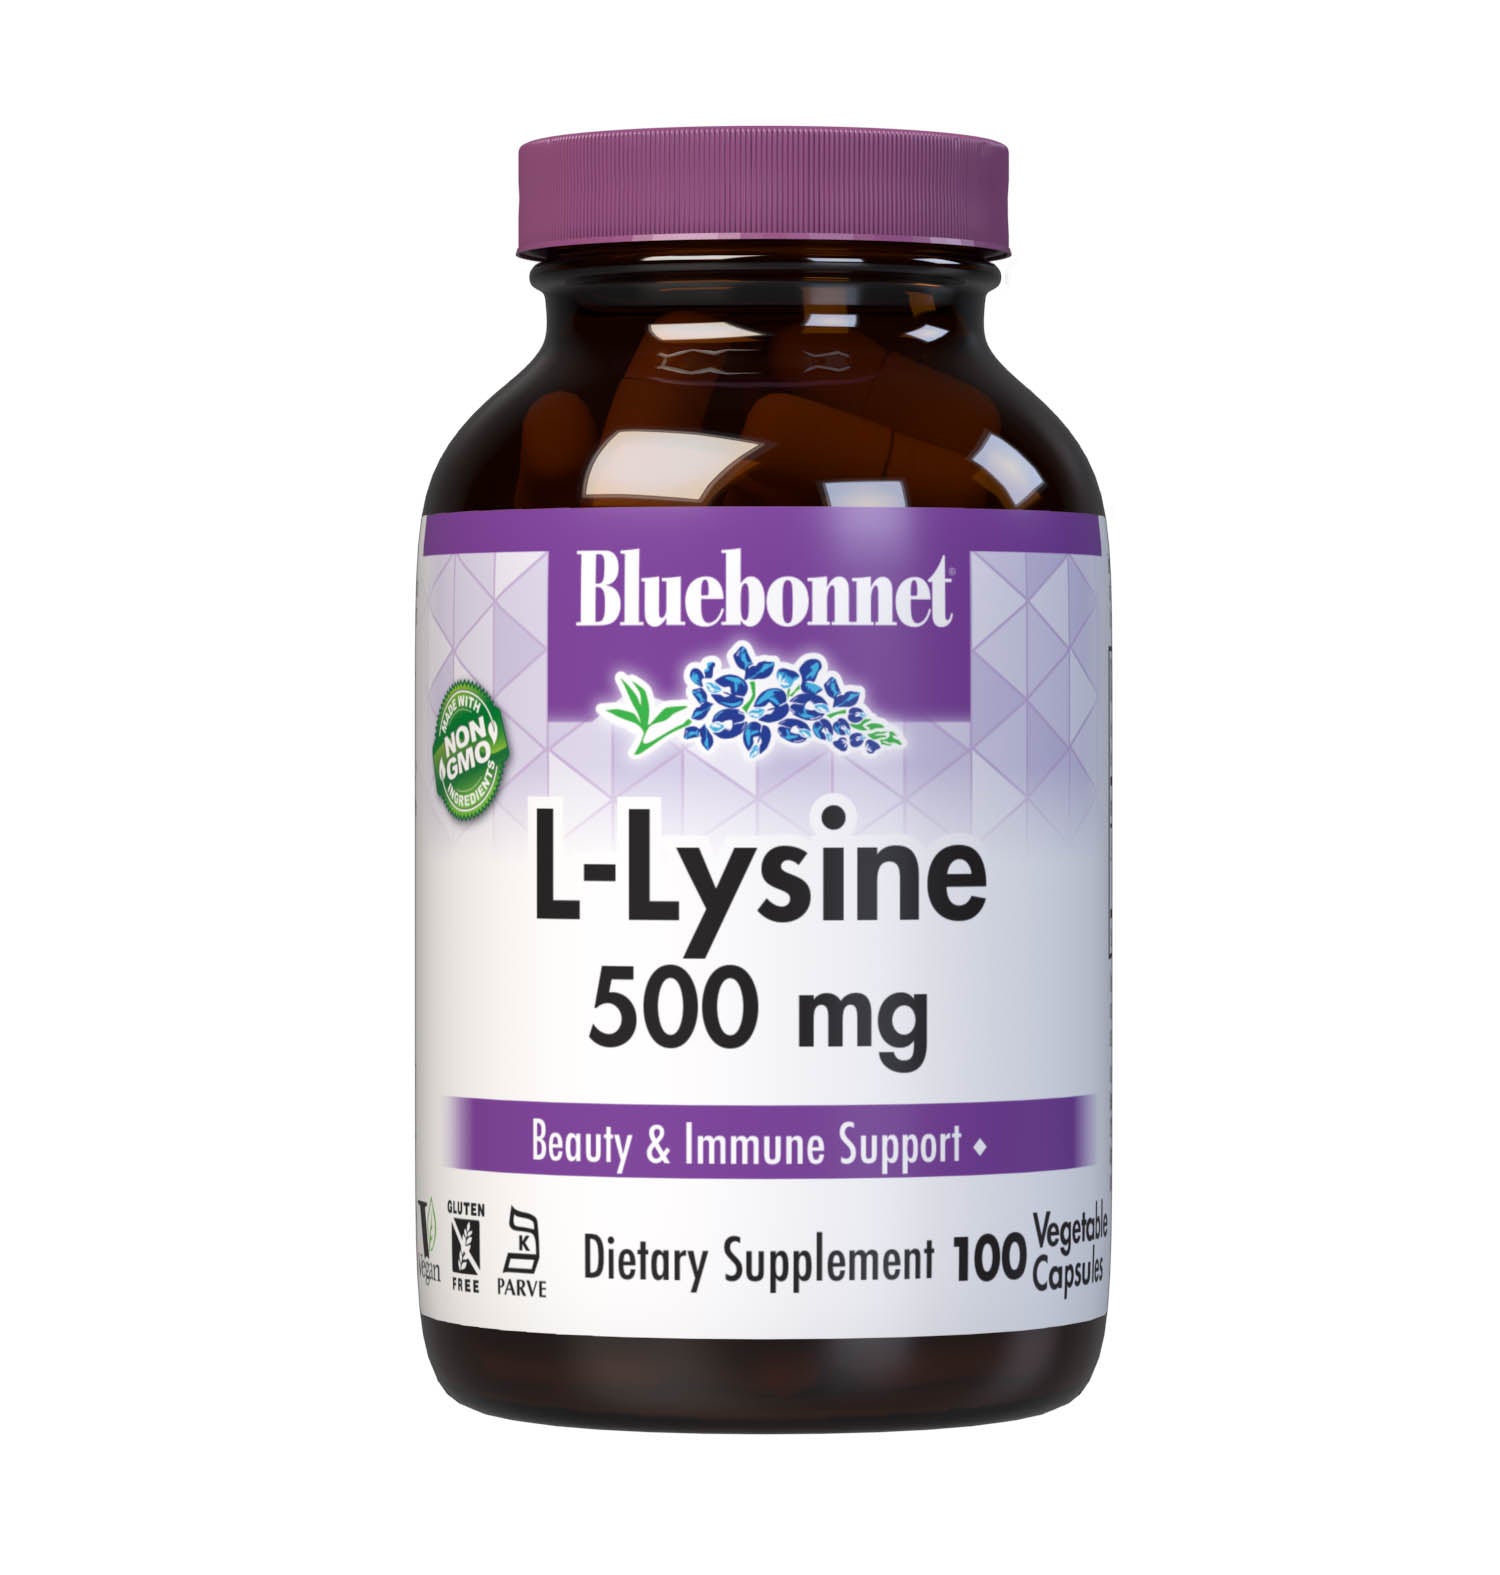 Bluebonnet’s L-Lysine 500 mg 100 vegetable capsules are formulated with the free-form amino acid L-lysine HCI in its crystalline form from Ajinomoto to help support immune function and collagen synthesis. #size_100 count